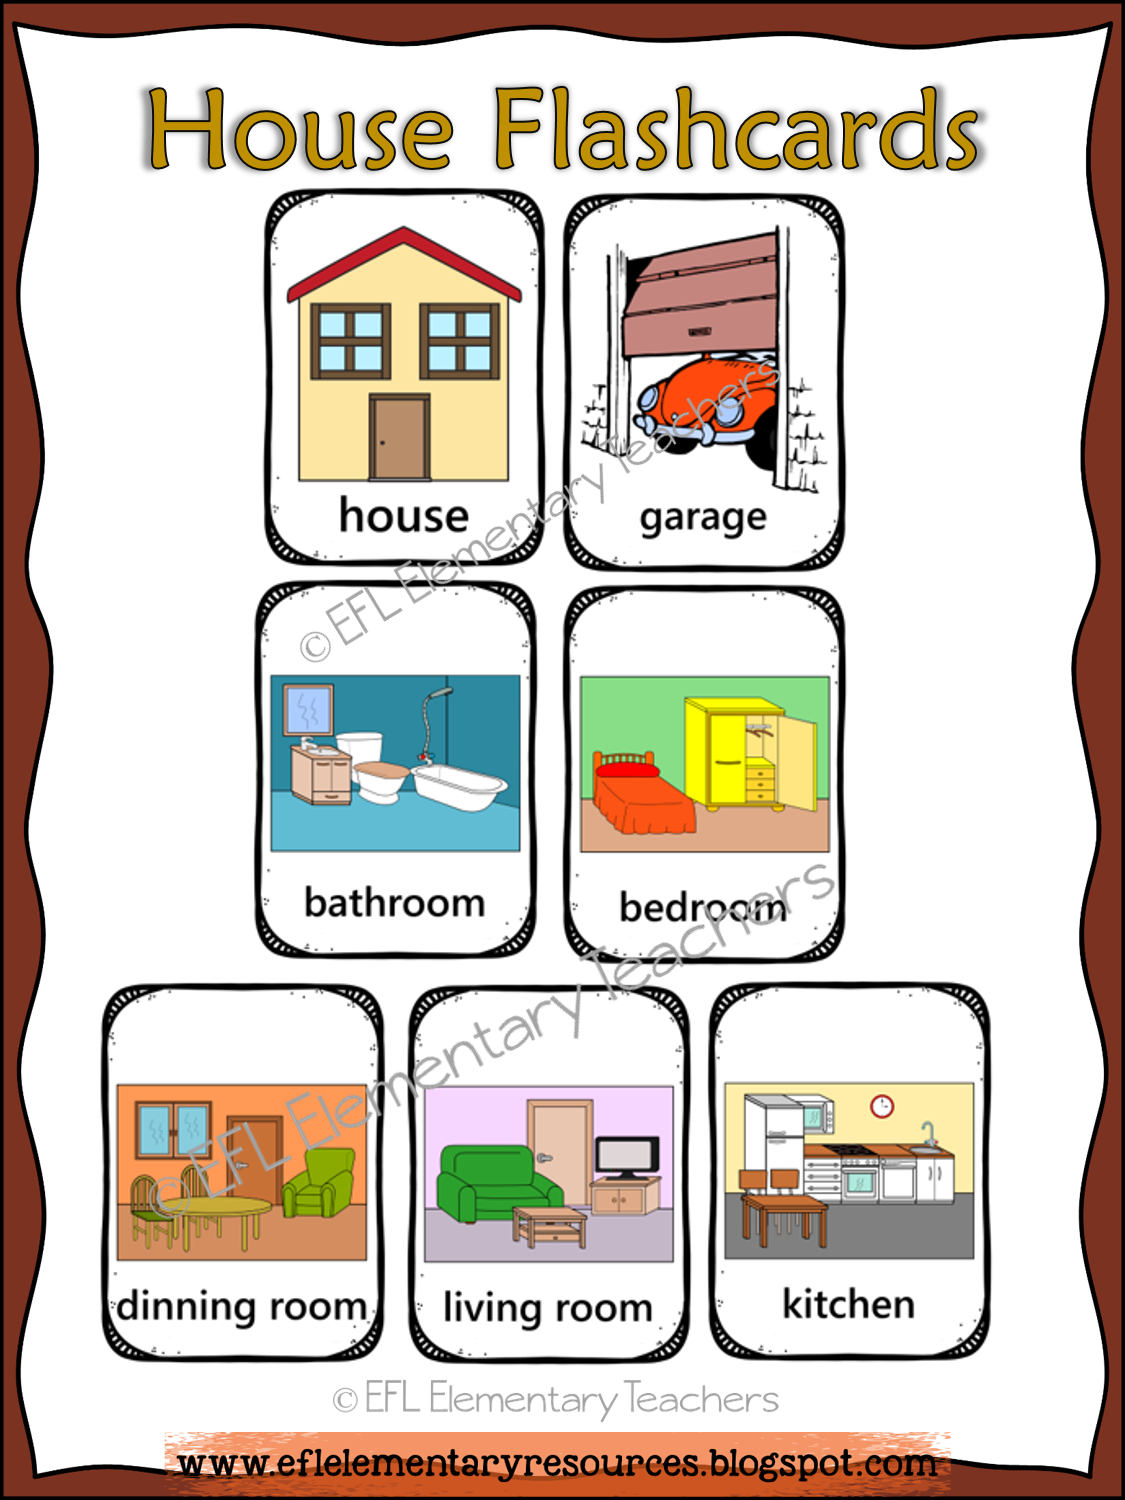 Rooms in the House карточки. Карточки на английском комнаты в доме. Комнаты Worksheets for Kids. Комнаты английский for Kids. My house pictures